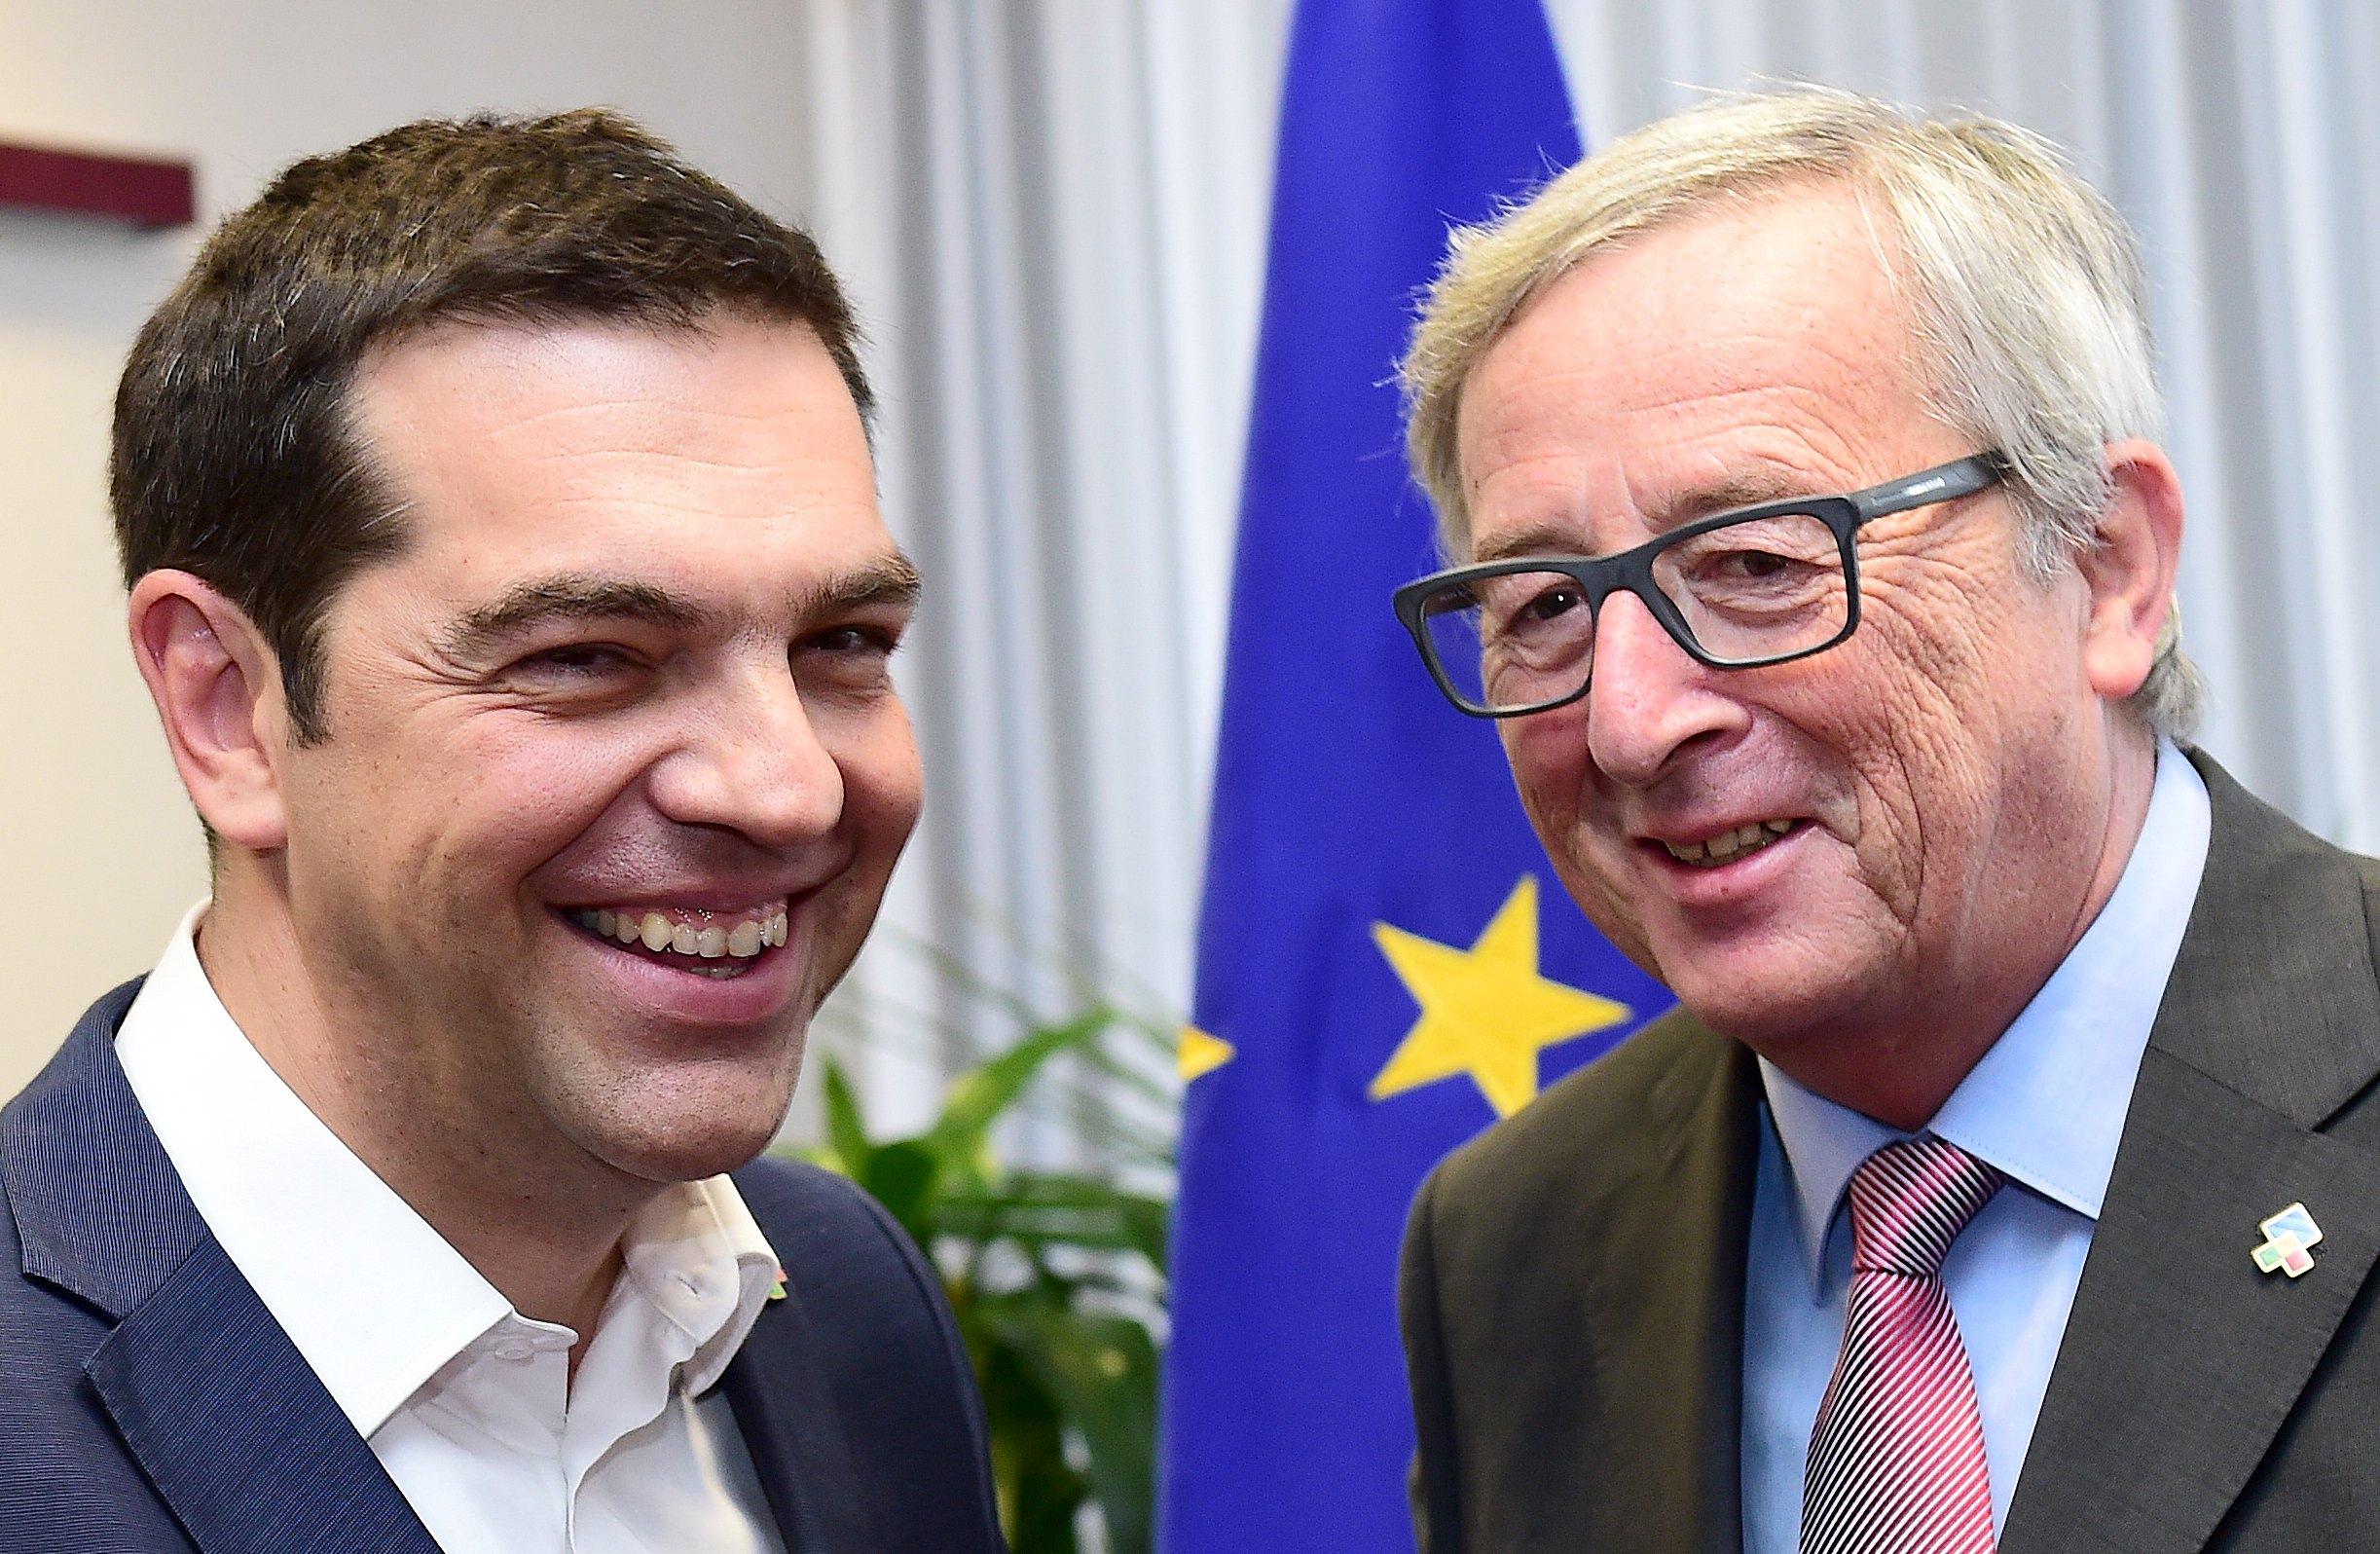 Greek Prime Minister Alexis Tsipras poses with European Commission President Jean-Claude Juncker (R) as an International Monetary Fund economist said a deal with the country will be tough on both sides. Photo: Reuters